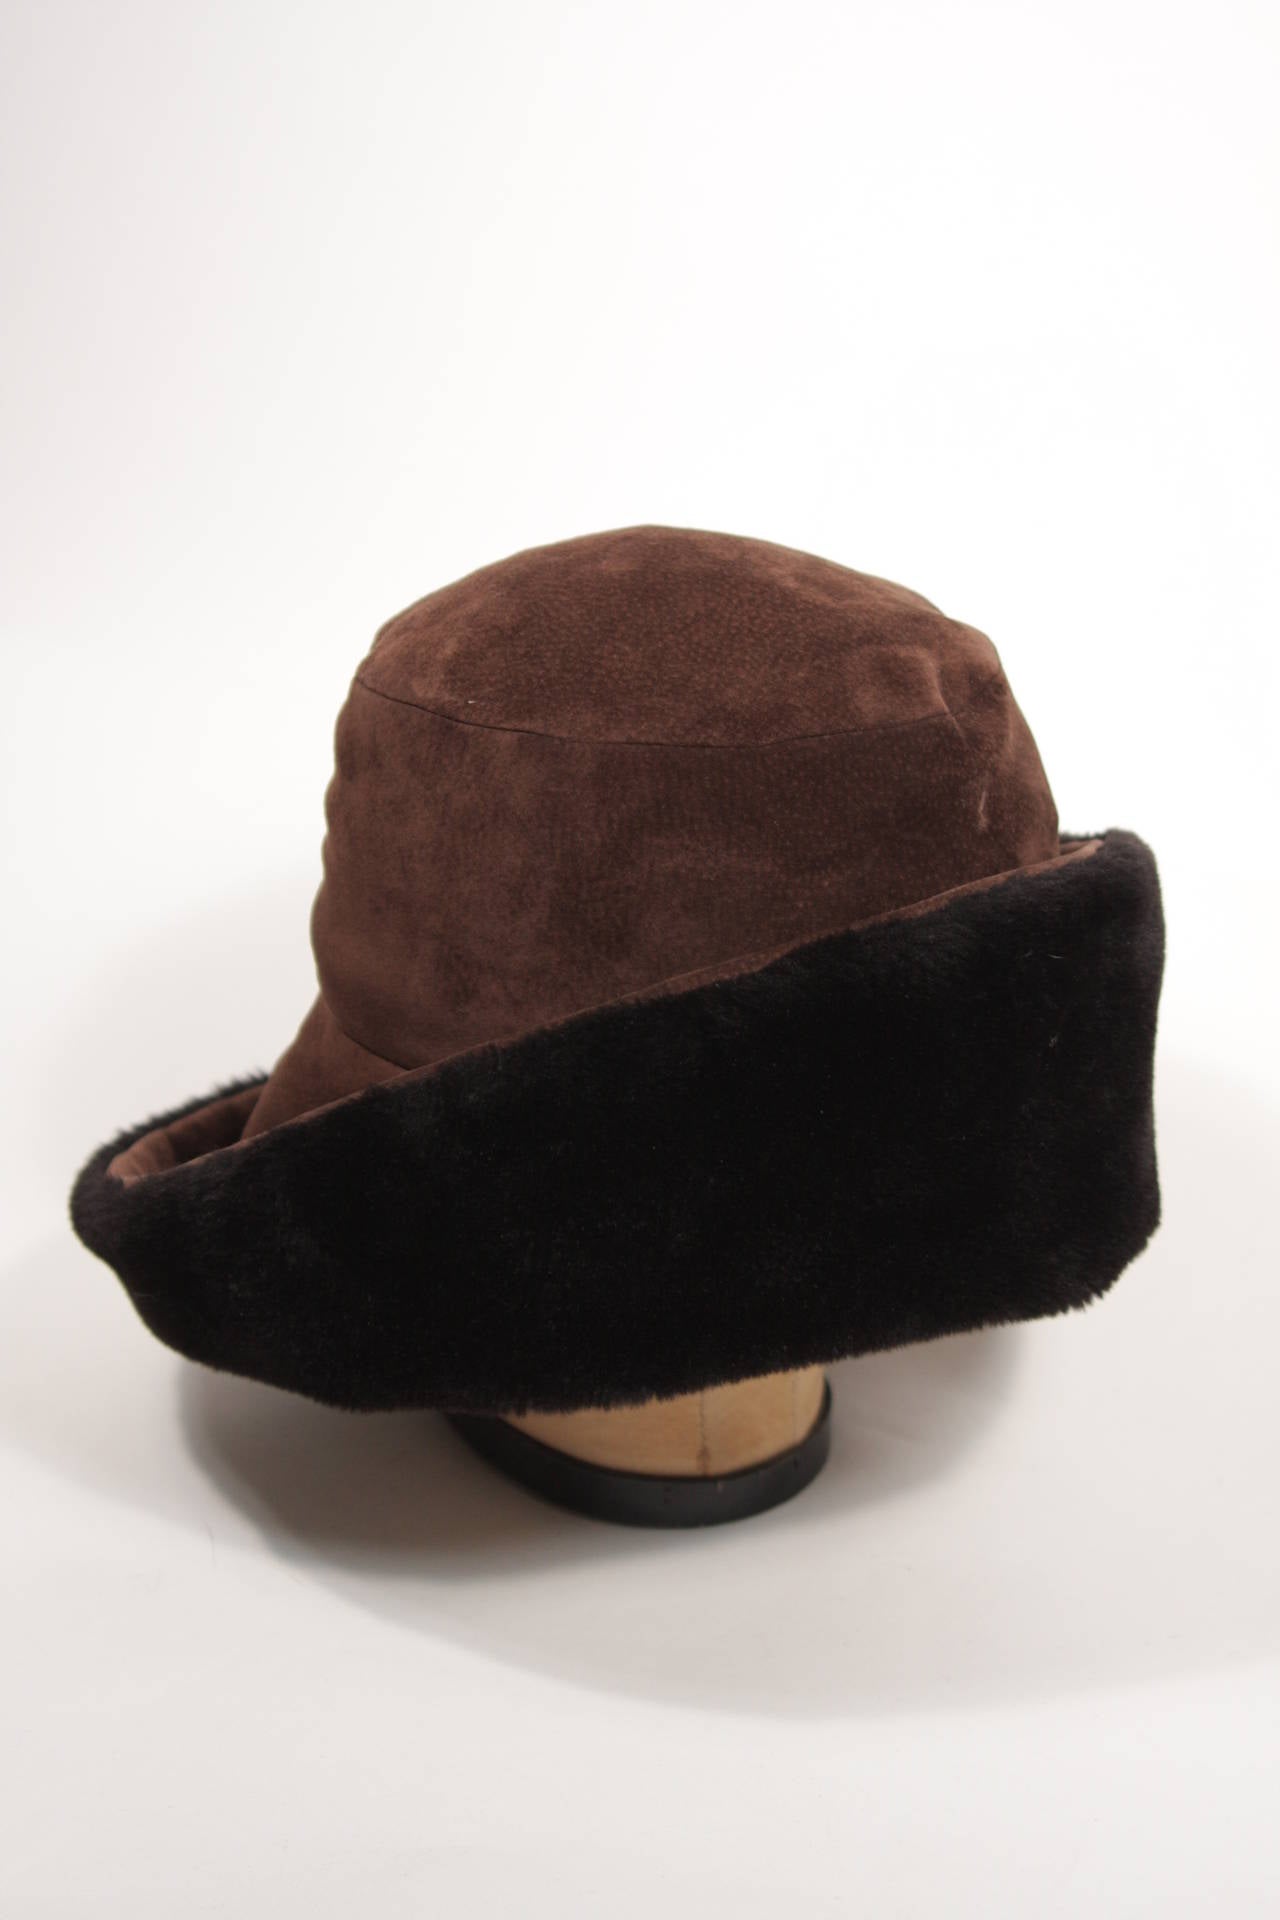 Yves Saint Laurent Brown Suede Hat with Black Sherling Interior 1